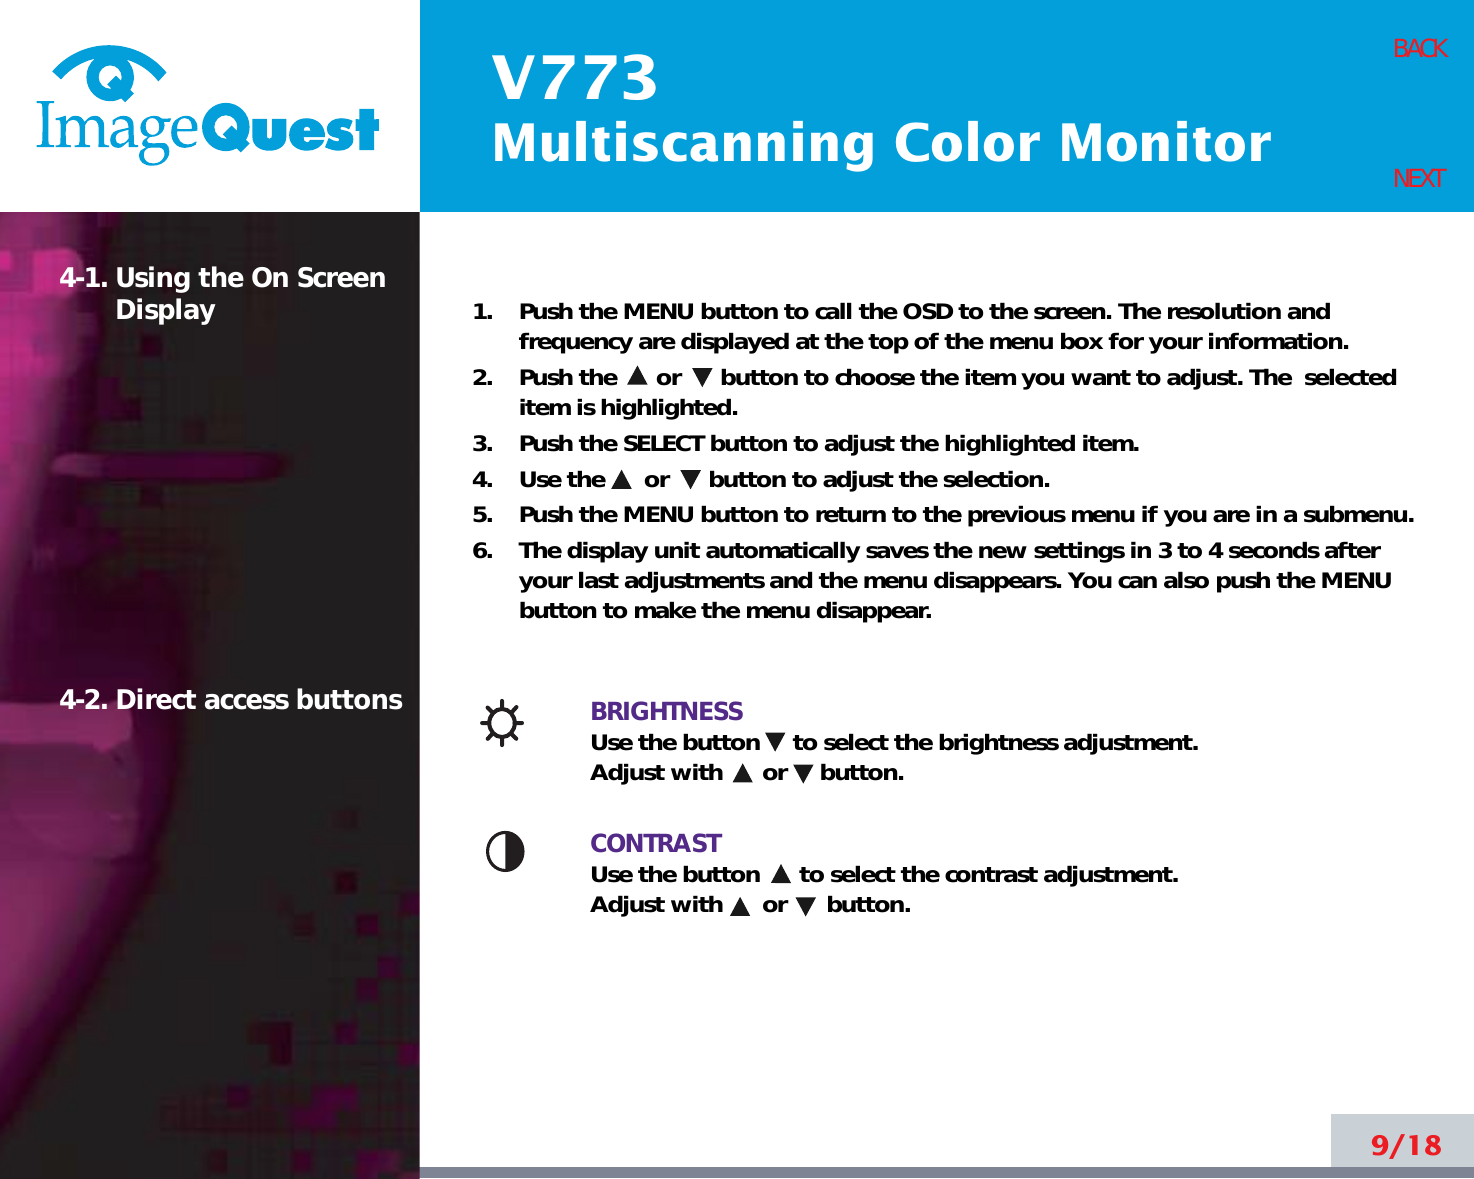 V773Multiscanning Color Monitor9/18BACKNEXT1.    Push the MENU button to call the OSD to the screen. The resolution andfrequency are displayed at the top of the menu box for your information.2.    Push the      or      button to choose the item you want to adjust. The  selecteditem is highlighted.3.    Push the SELECT button to adjust the highlighted item. 4.    Use the      or      button to adjust the selection.5.    Push the MENU button to return to the previous menu if you are in a submenu.6.    The display unit automatically saves the new settings in 3 to 4 seconds afteryour last adjustments and the menu disappears. You can also push the MENUbutton to make the menu disappear.BRIGHTNESSUse the button     to select the brightness adjustment. Adjust with      or     button.CONTRASTUse the button      to select the contrast adjustment. Adjust with      or      button.4-1. Using the On ScreenDisplay 4-2. Direct access buttons